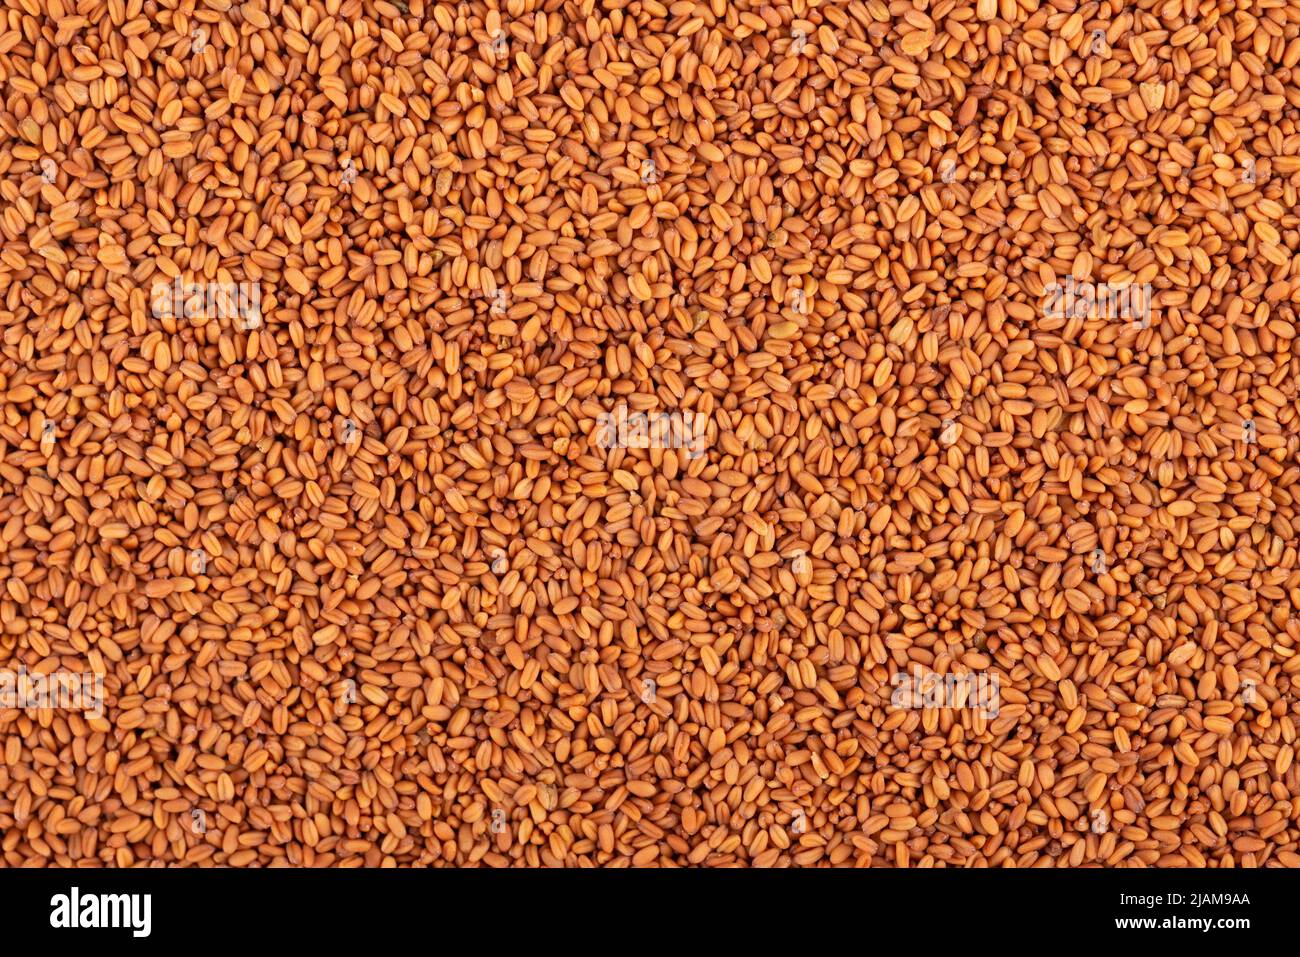 Camelina sativa seeds background. Seeds of camelina or false flax. Raw material for the production of camelina oil. Top view Stock Photo